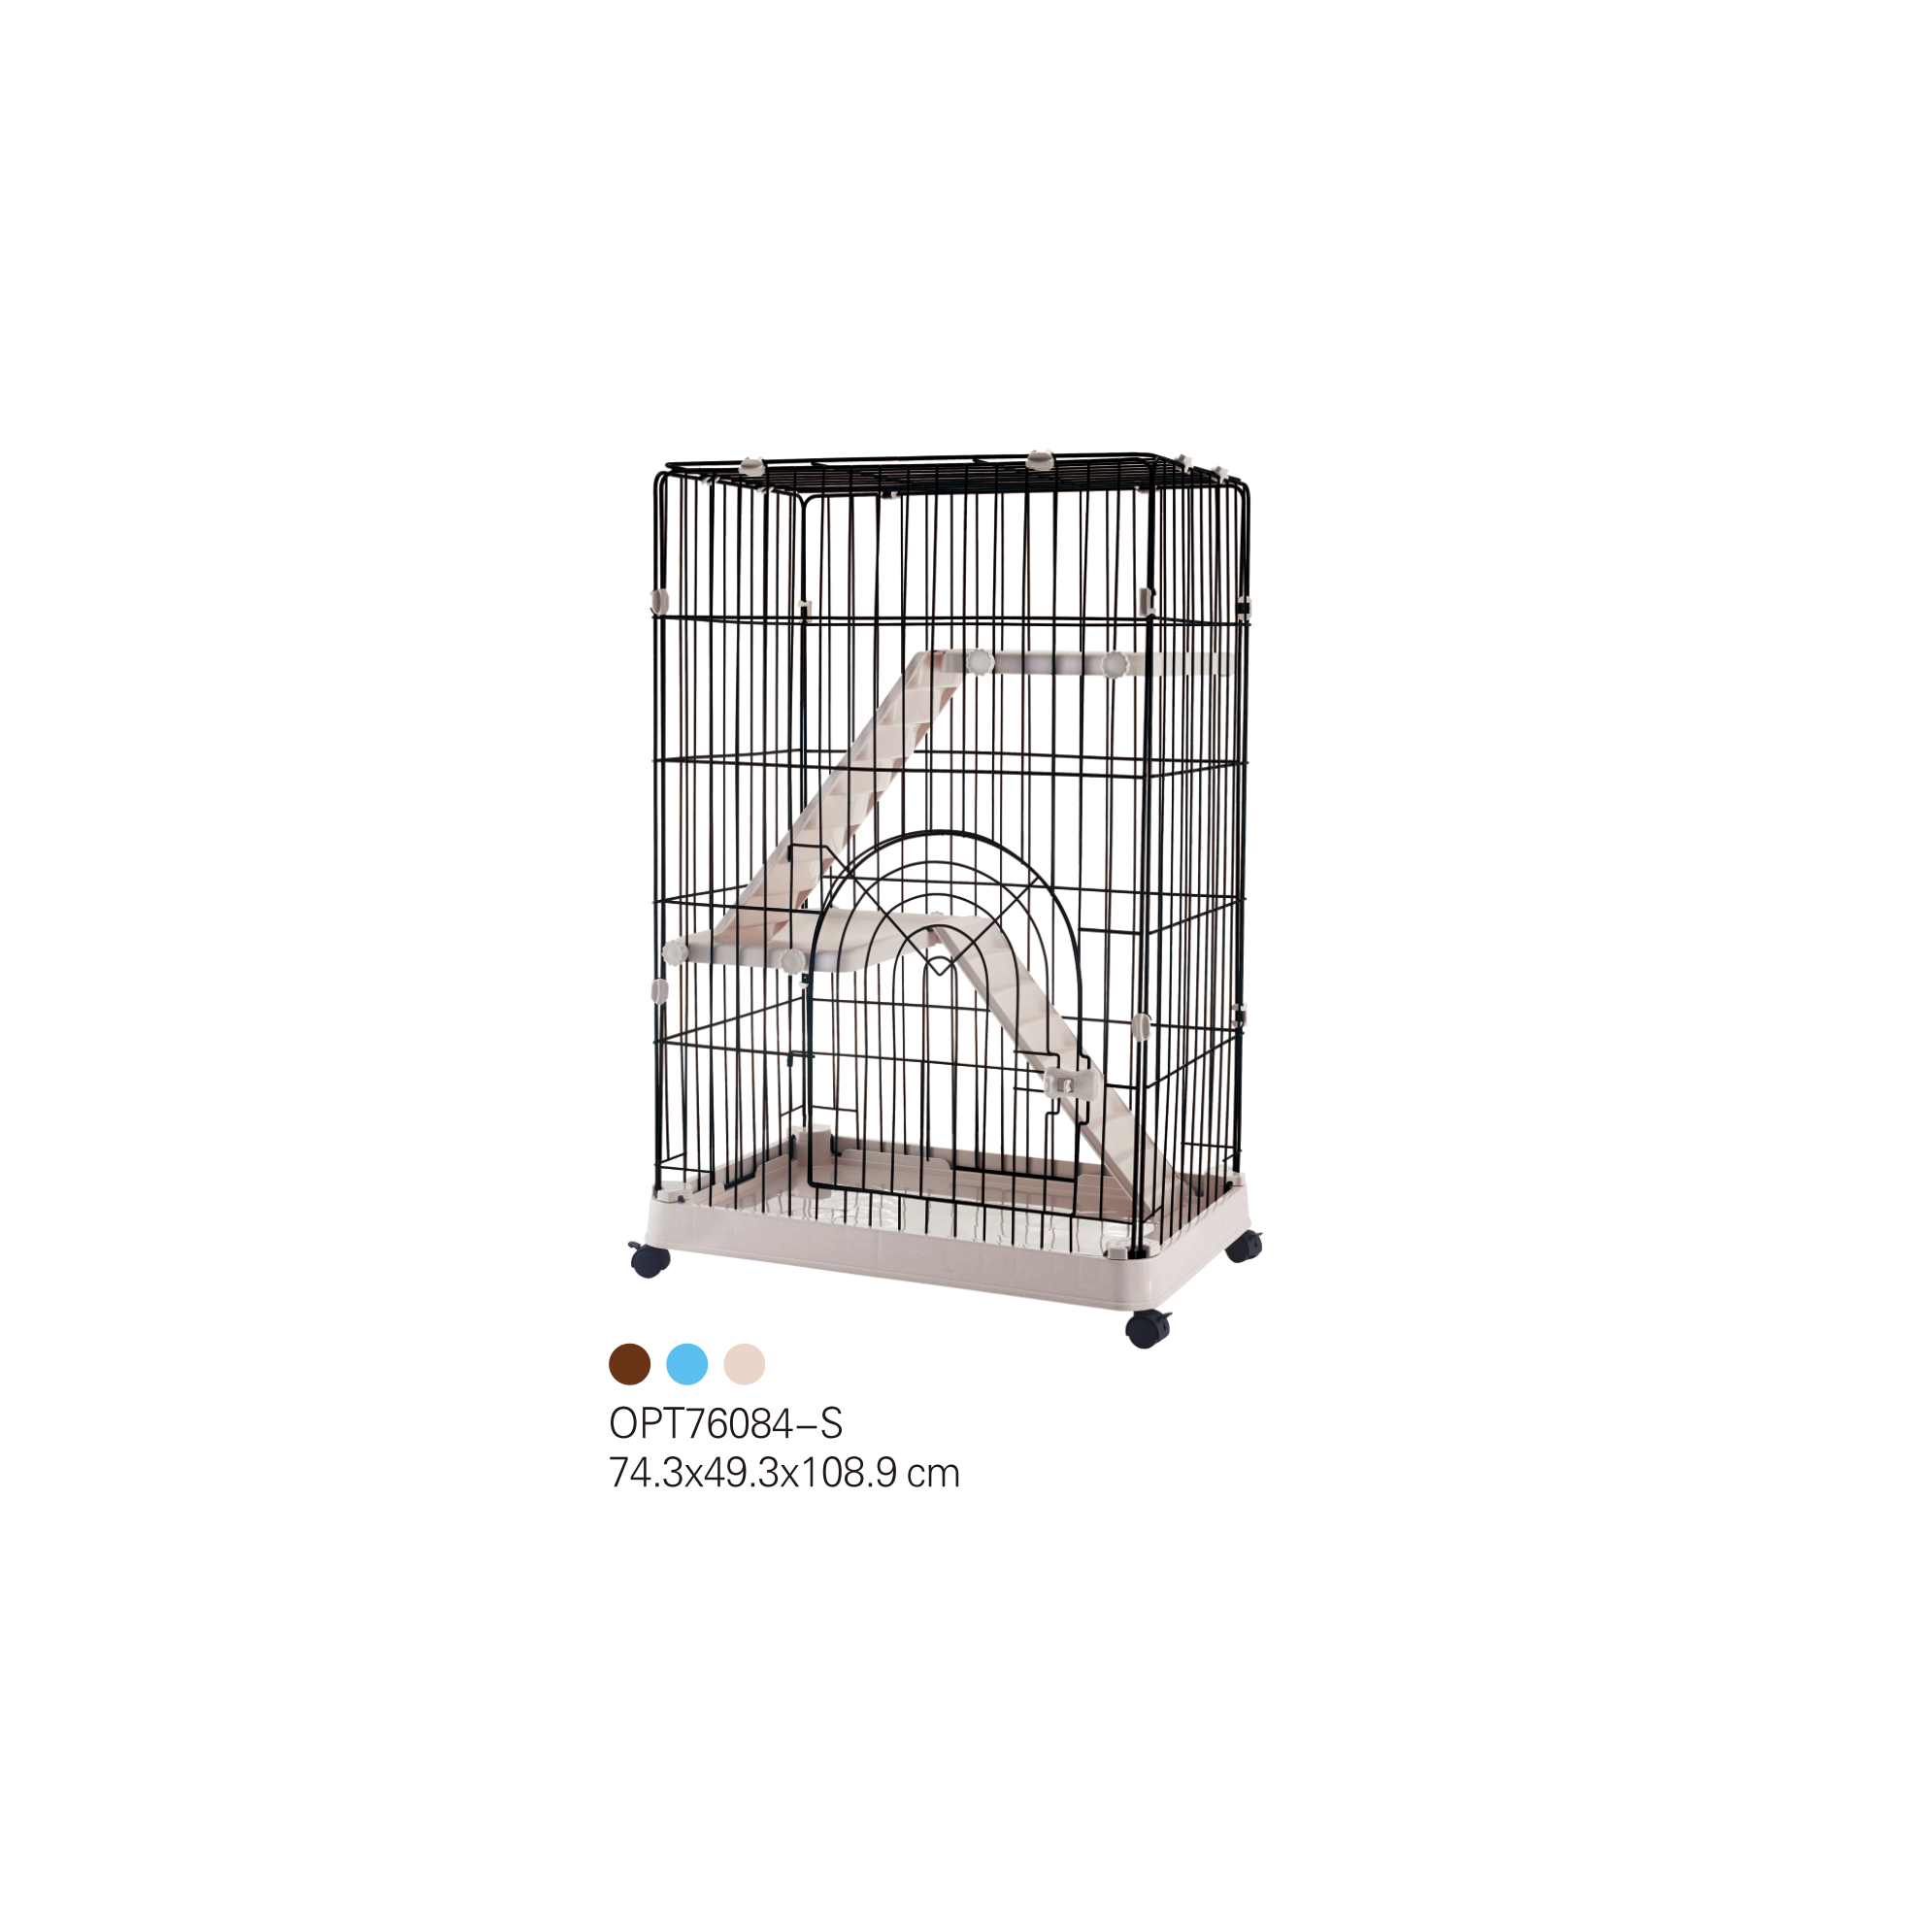 OPT76084 Pet cage